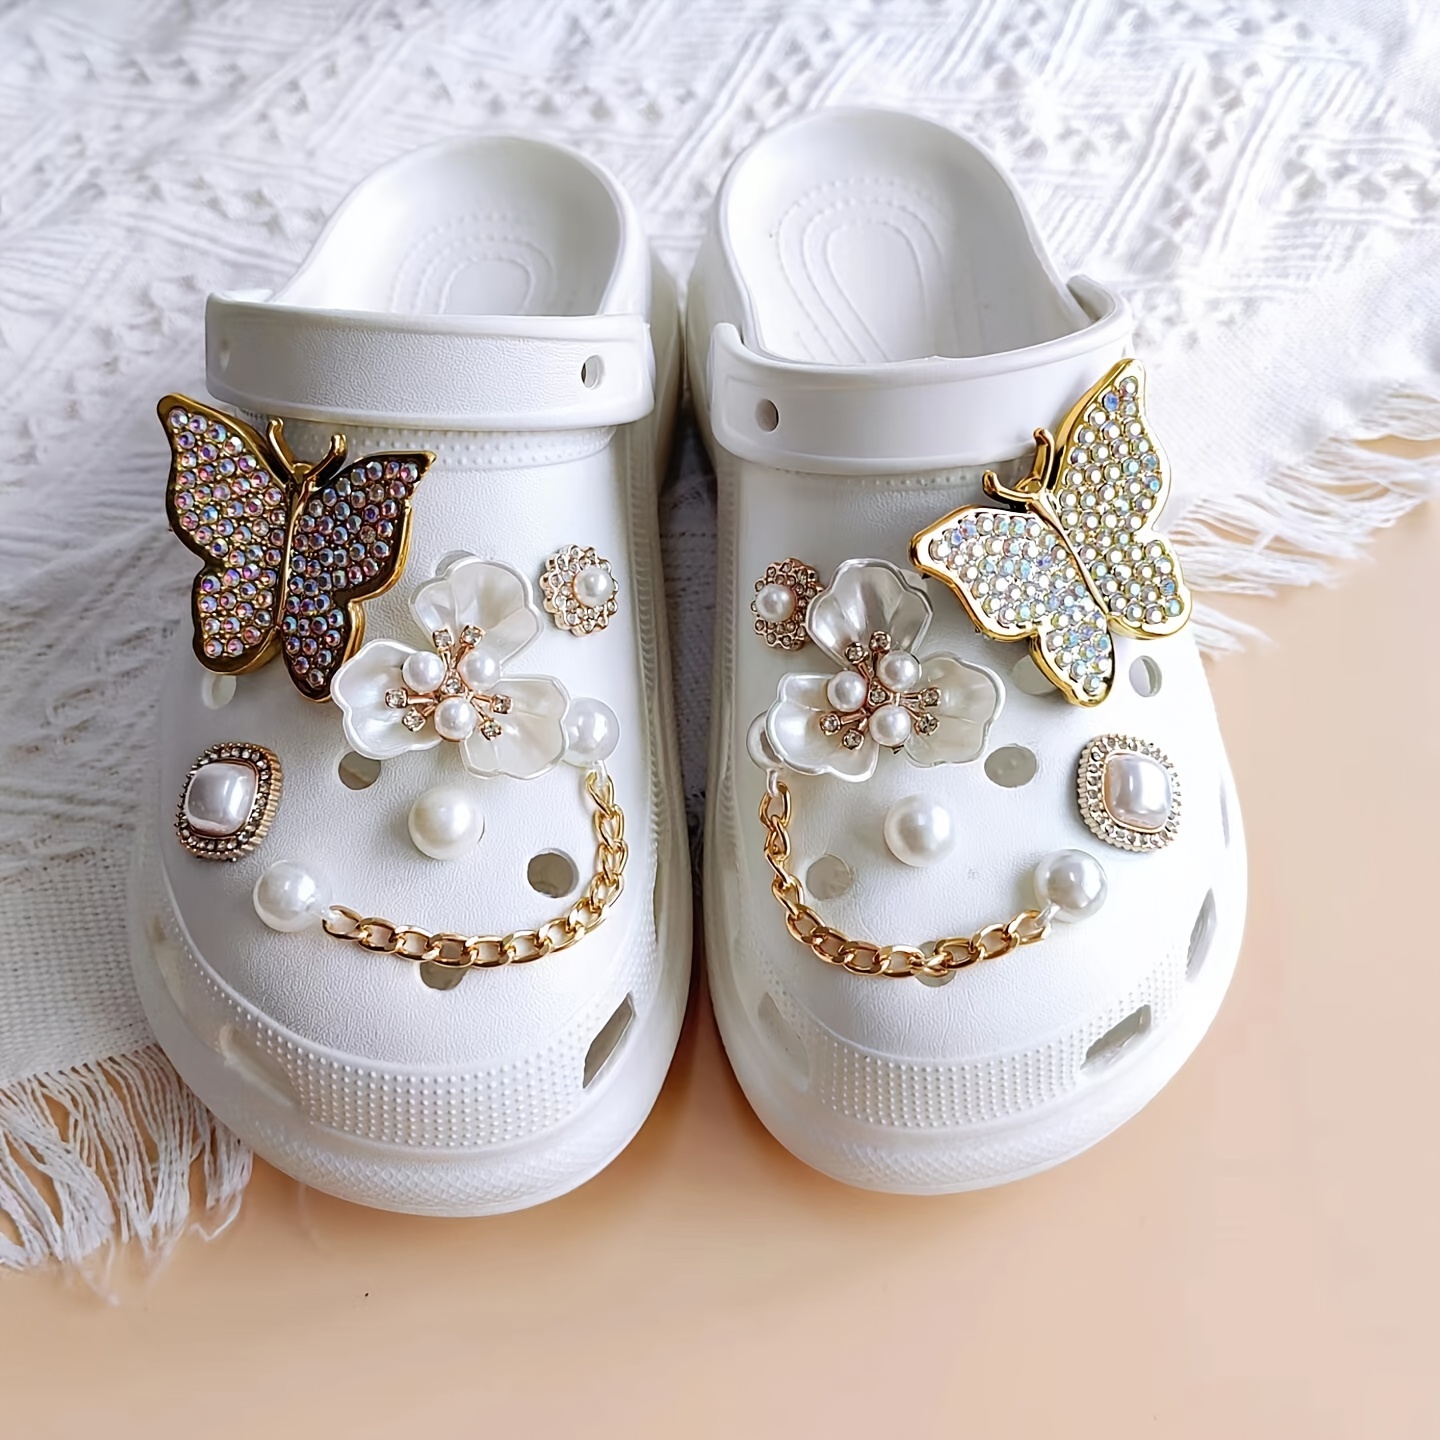 Fashion And Popular Hole Shoes Decorative Accessories Golden Butterfly Clover  Flower Golden Rhinestone Flashing Artificial Diamond Peach Heart Pearl Chain  Versatile Cute Trinkets, Can Be Used As A Gift, Party Decoration 